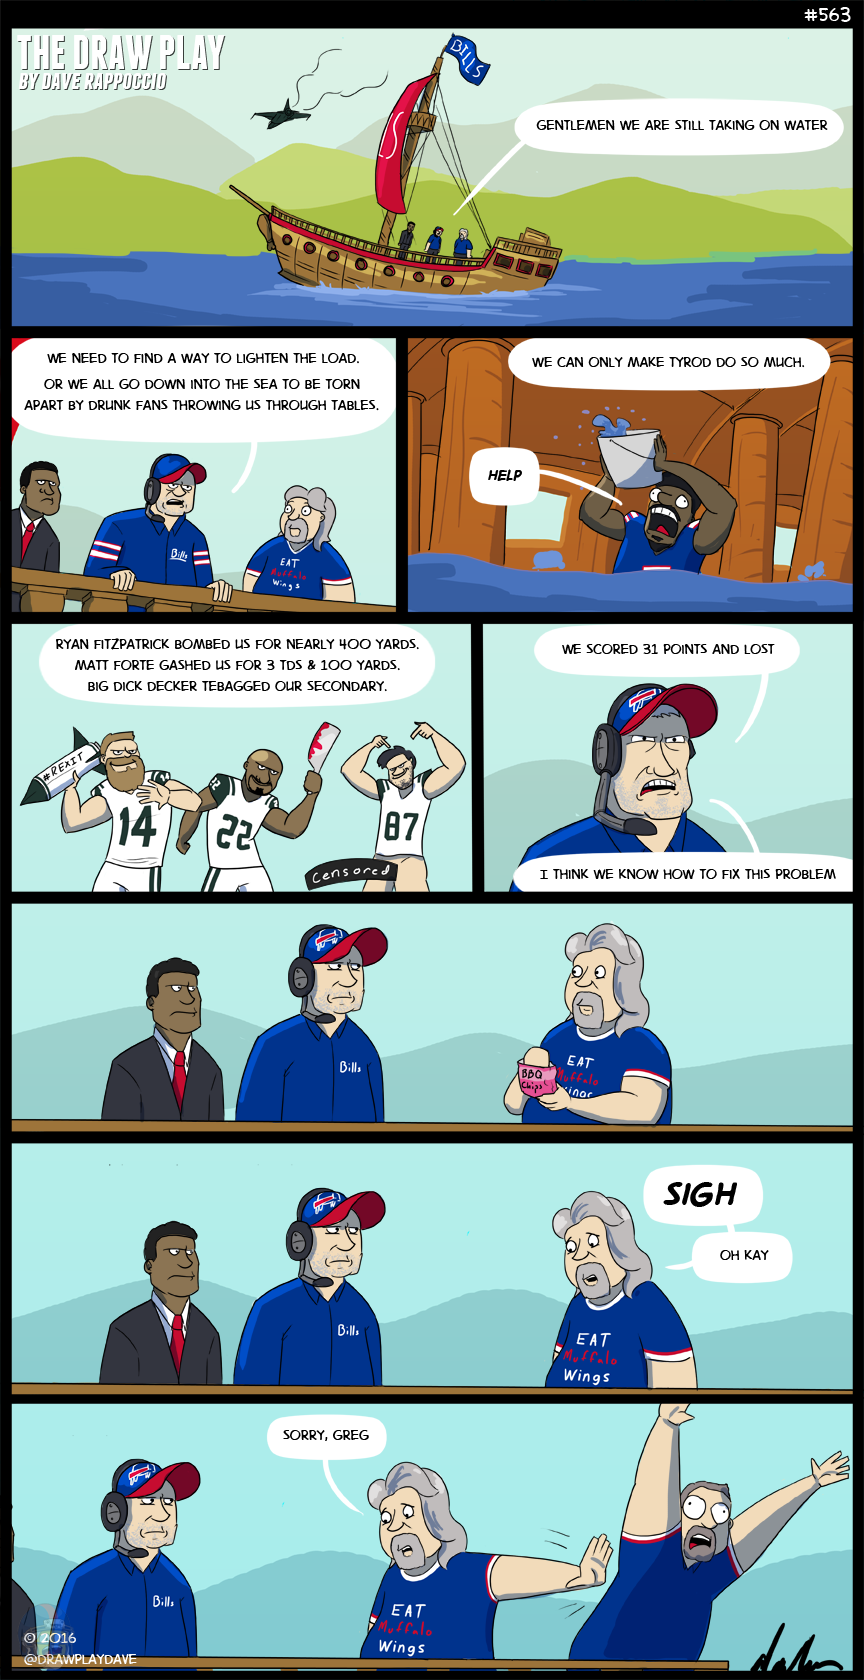 Can Rex Ryan Save His Sinking Ship The Draw Play